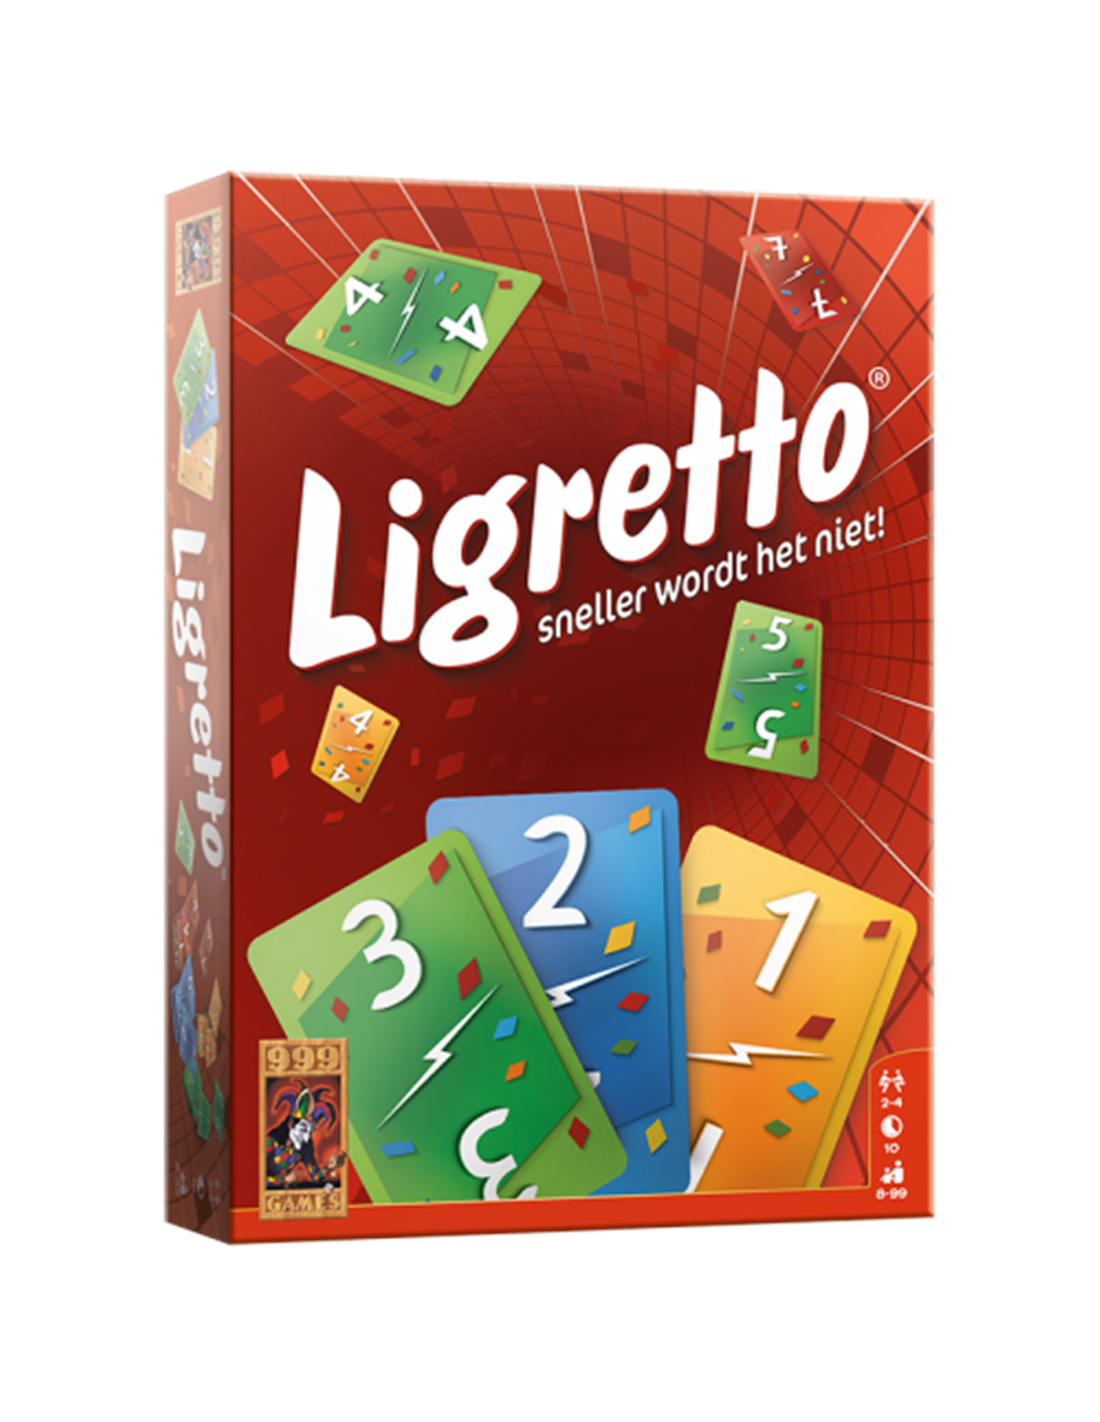 Ligretto Dice — This Is How We Roll